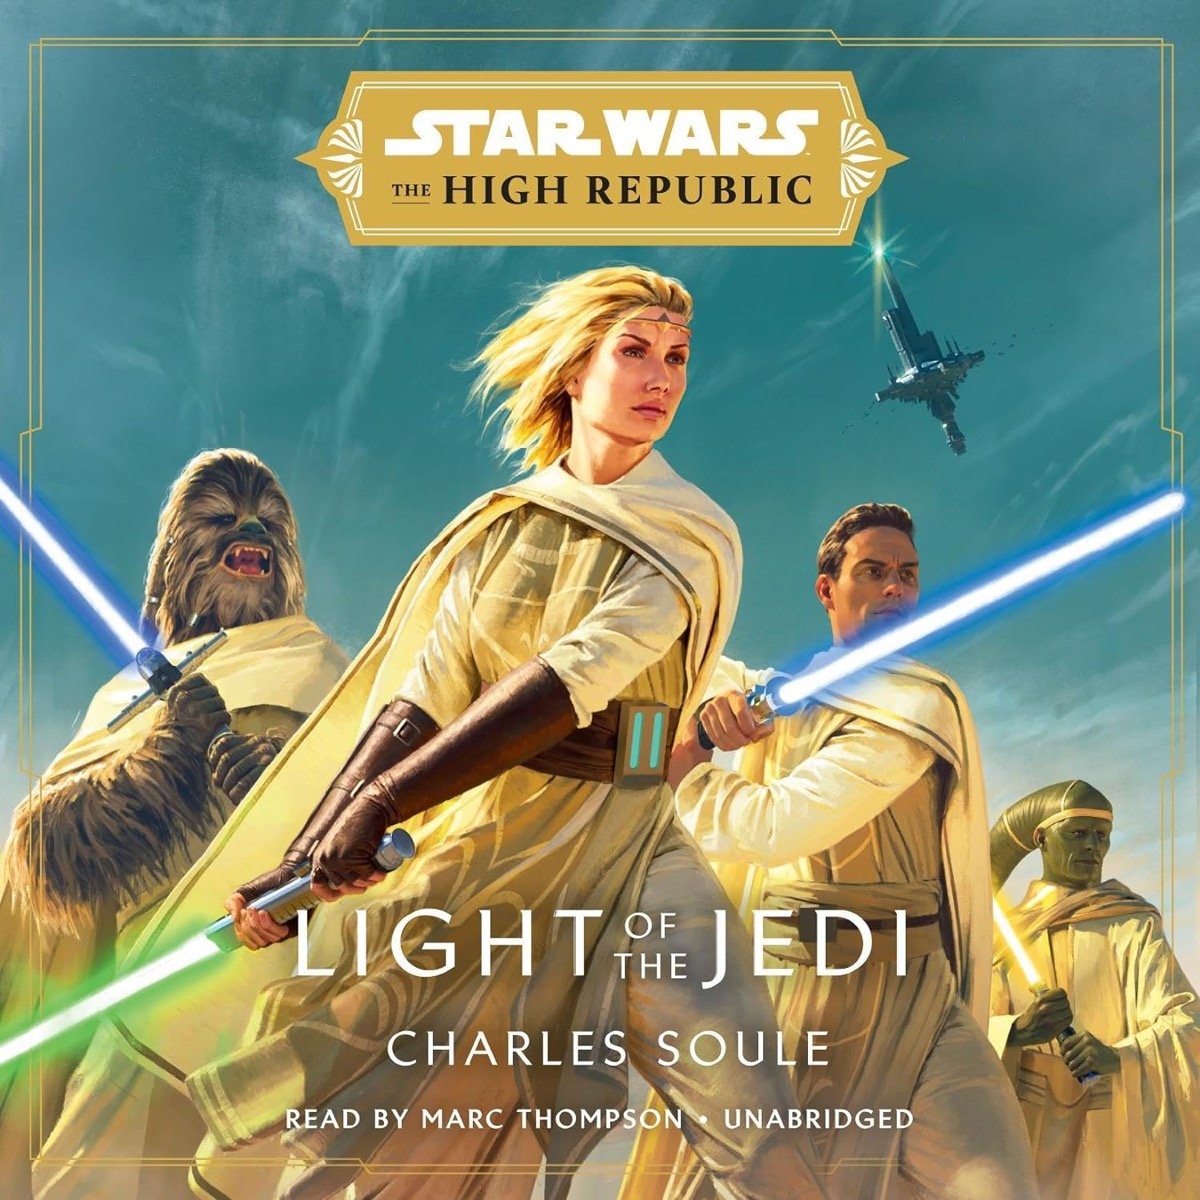 Cover art for "The High Republic" featuring Jedi